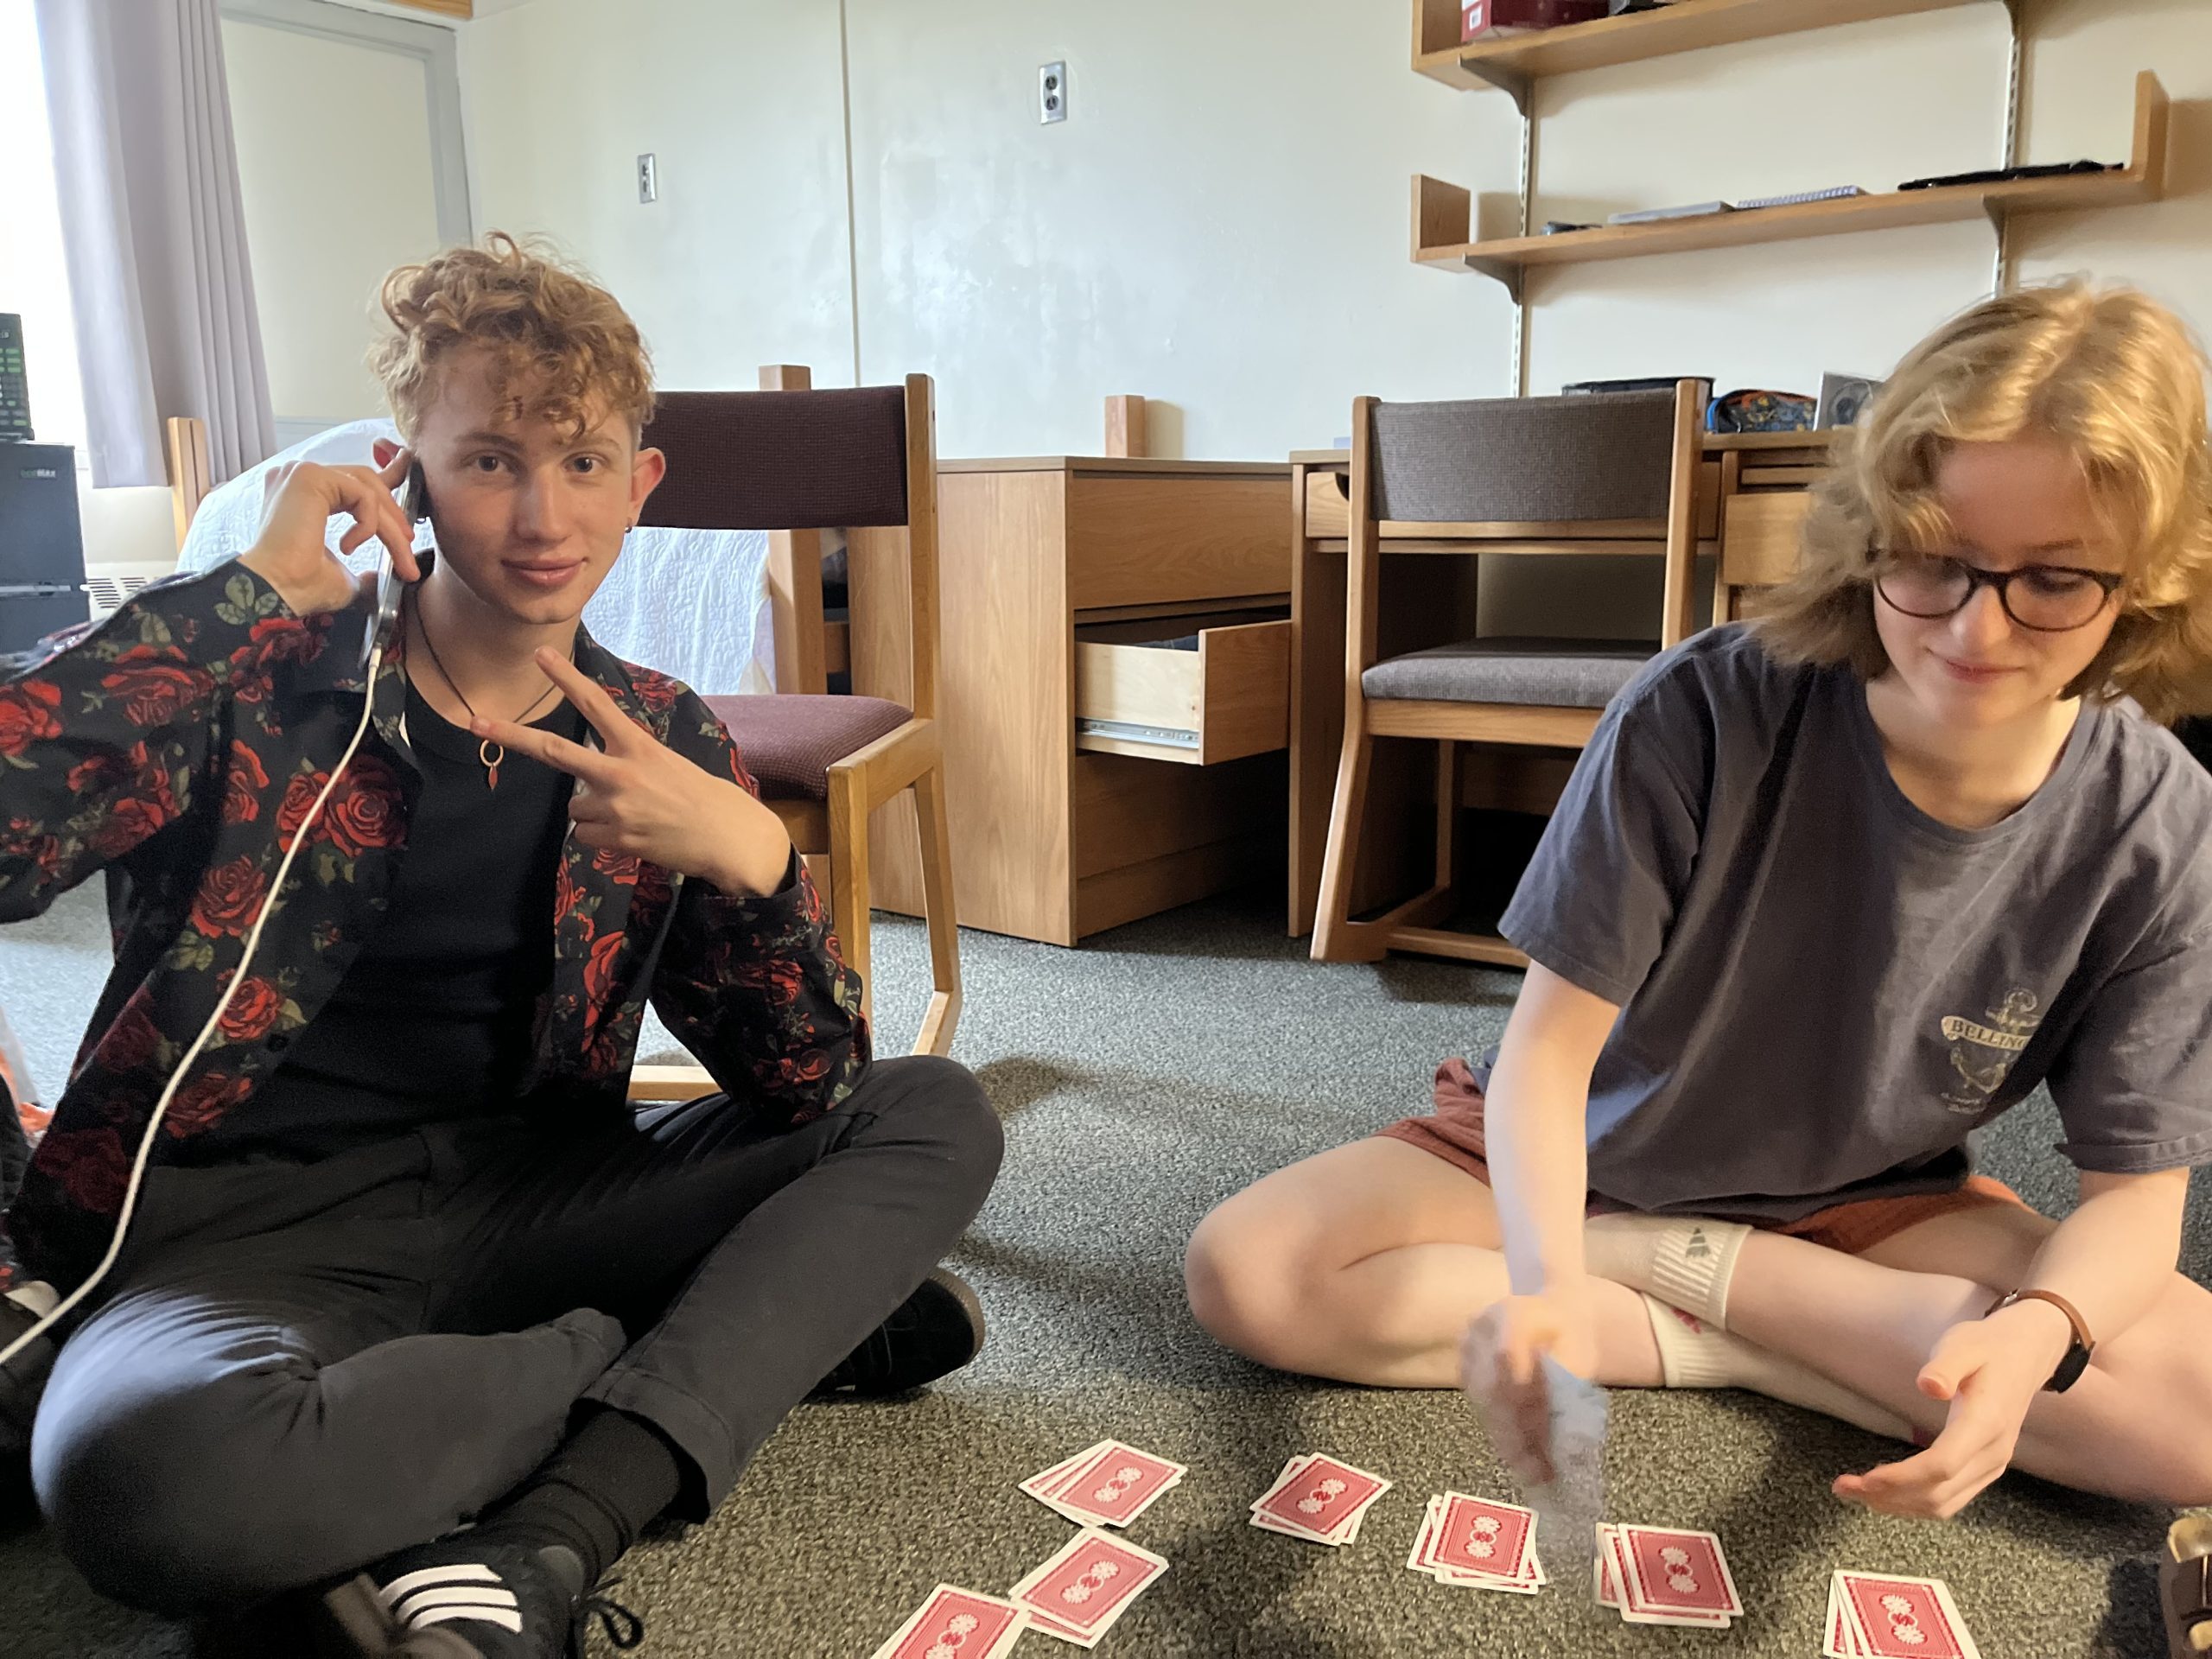 Two students play with a deck of cards